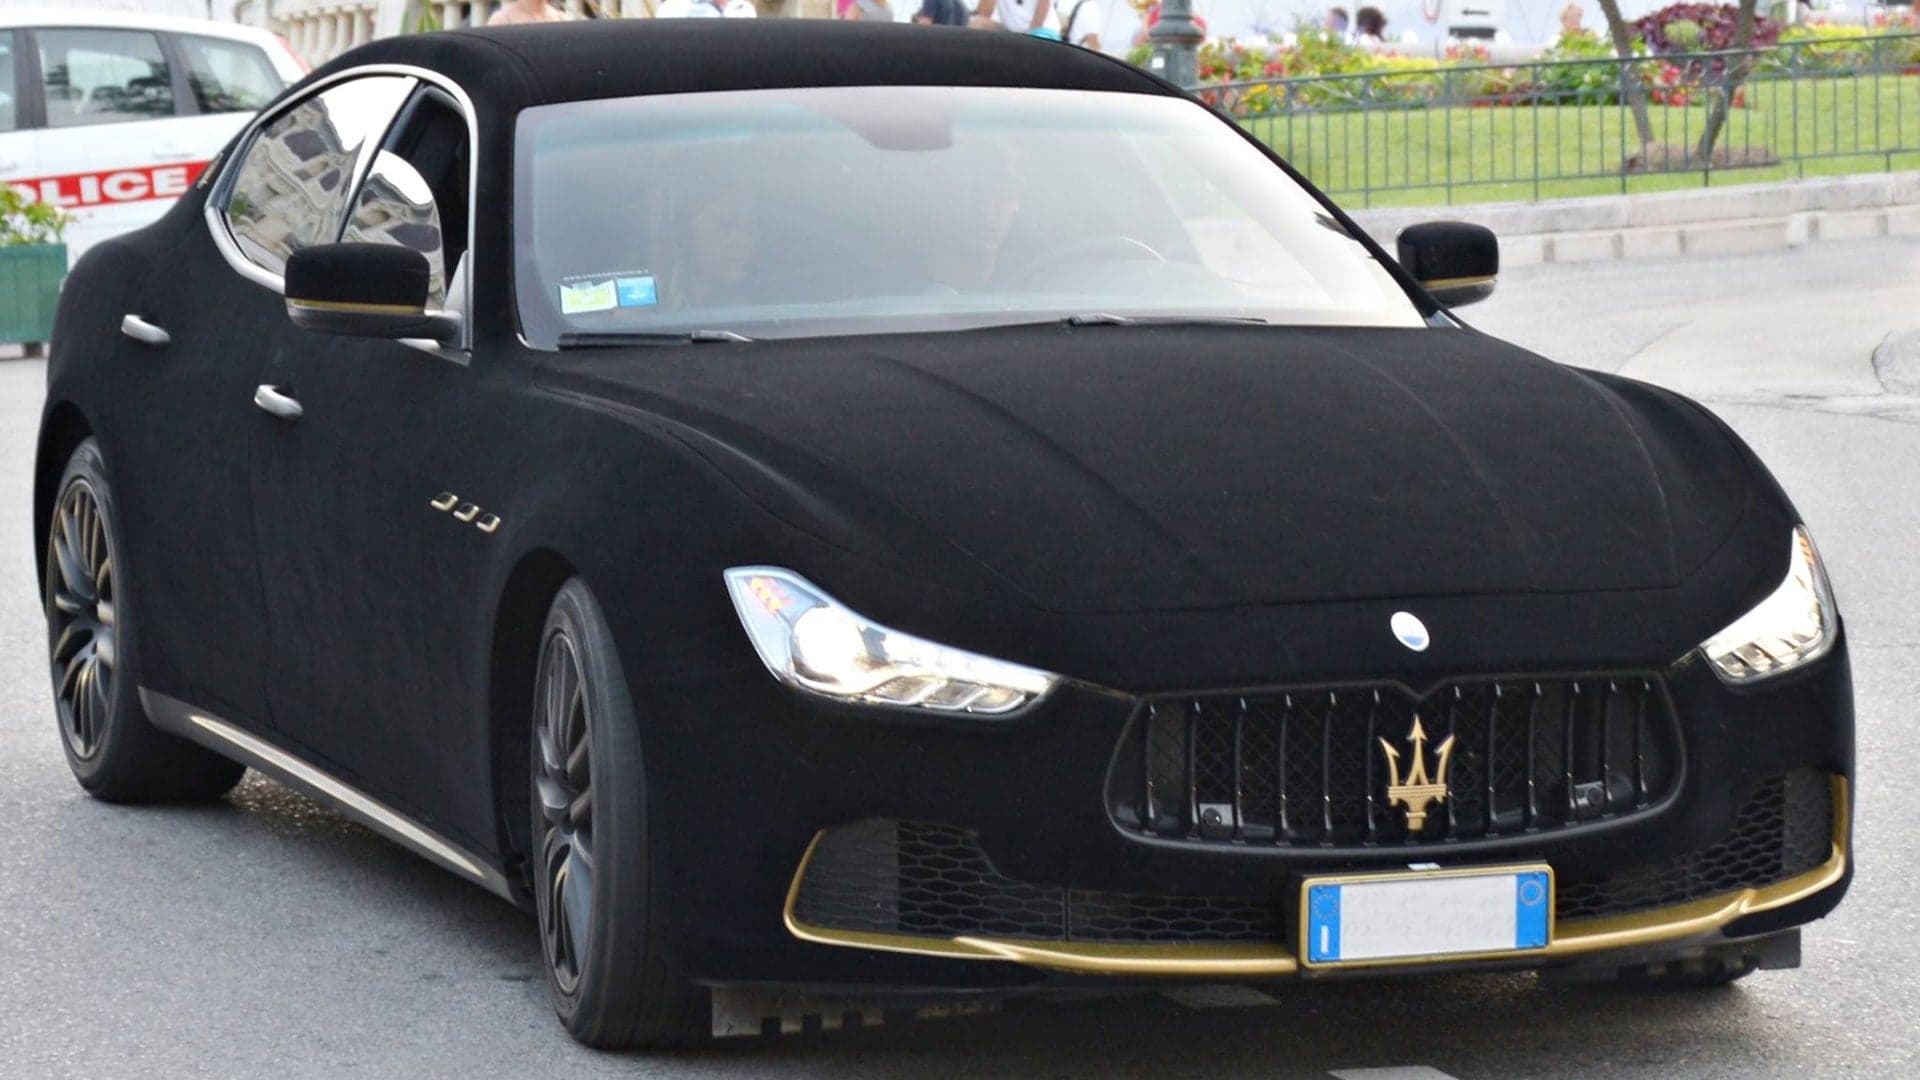 Someone Wrapped a Maserati Ghibli in Velvet and Nothing Makes Sense Anymore